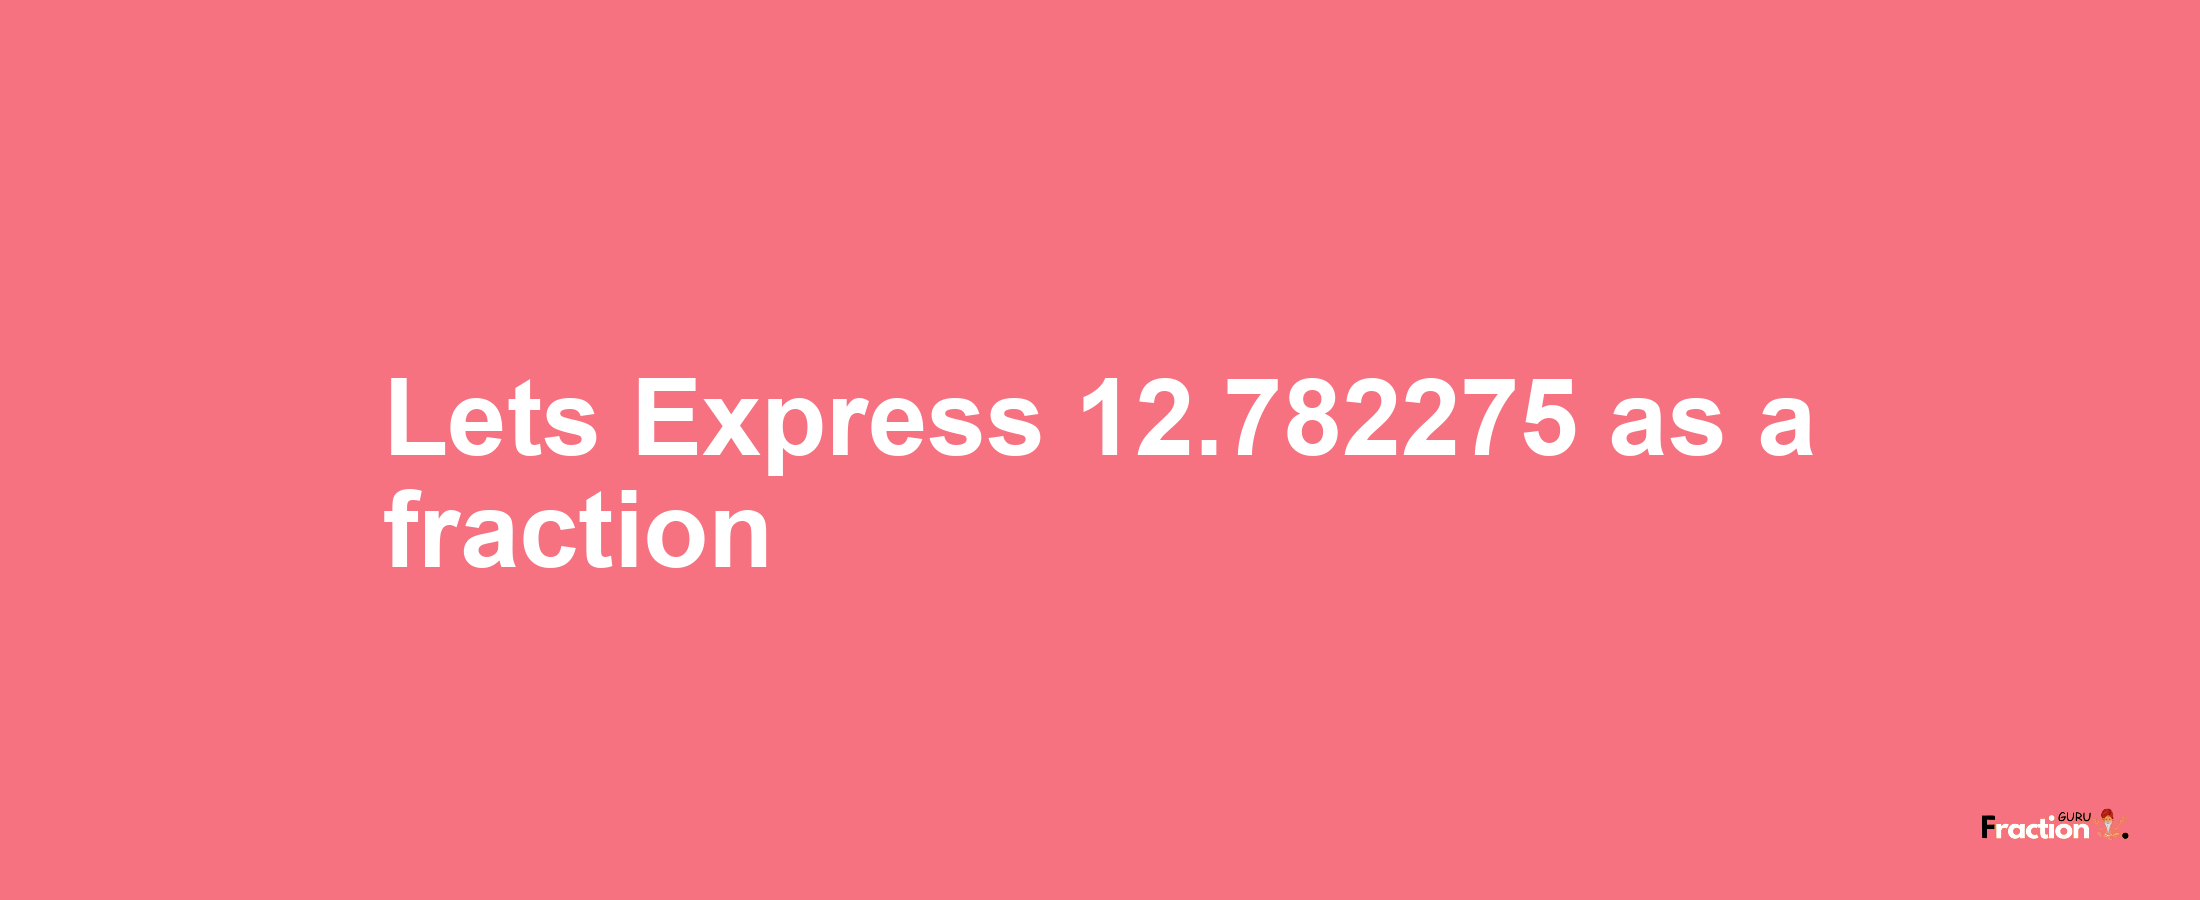 Lets Express 12.782275 as afraction